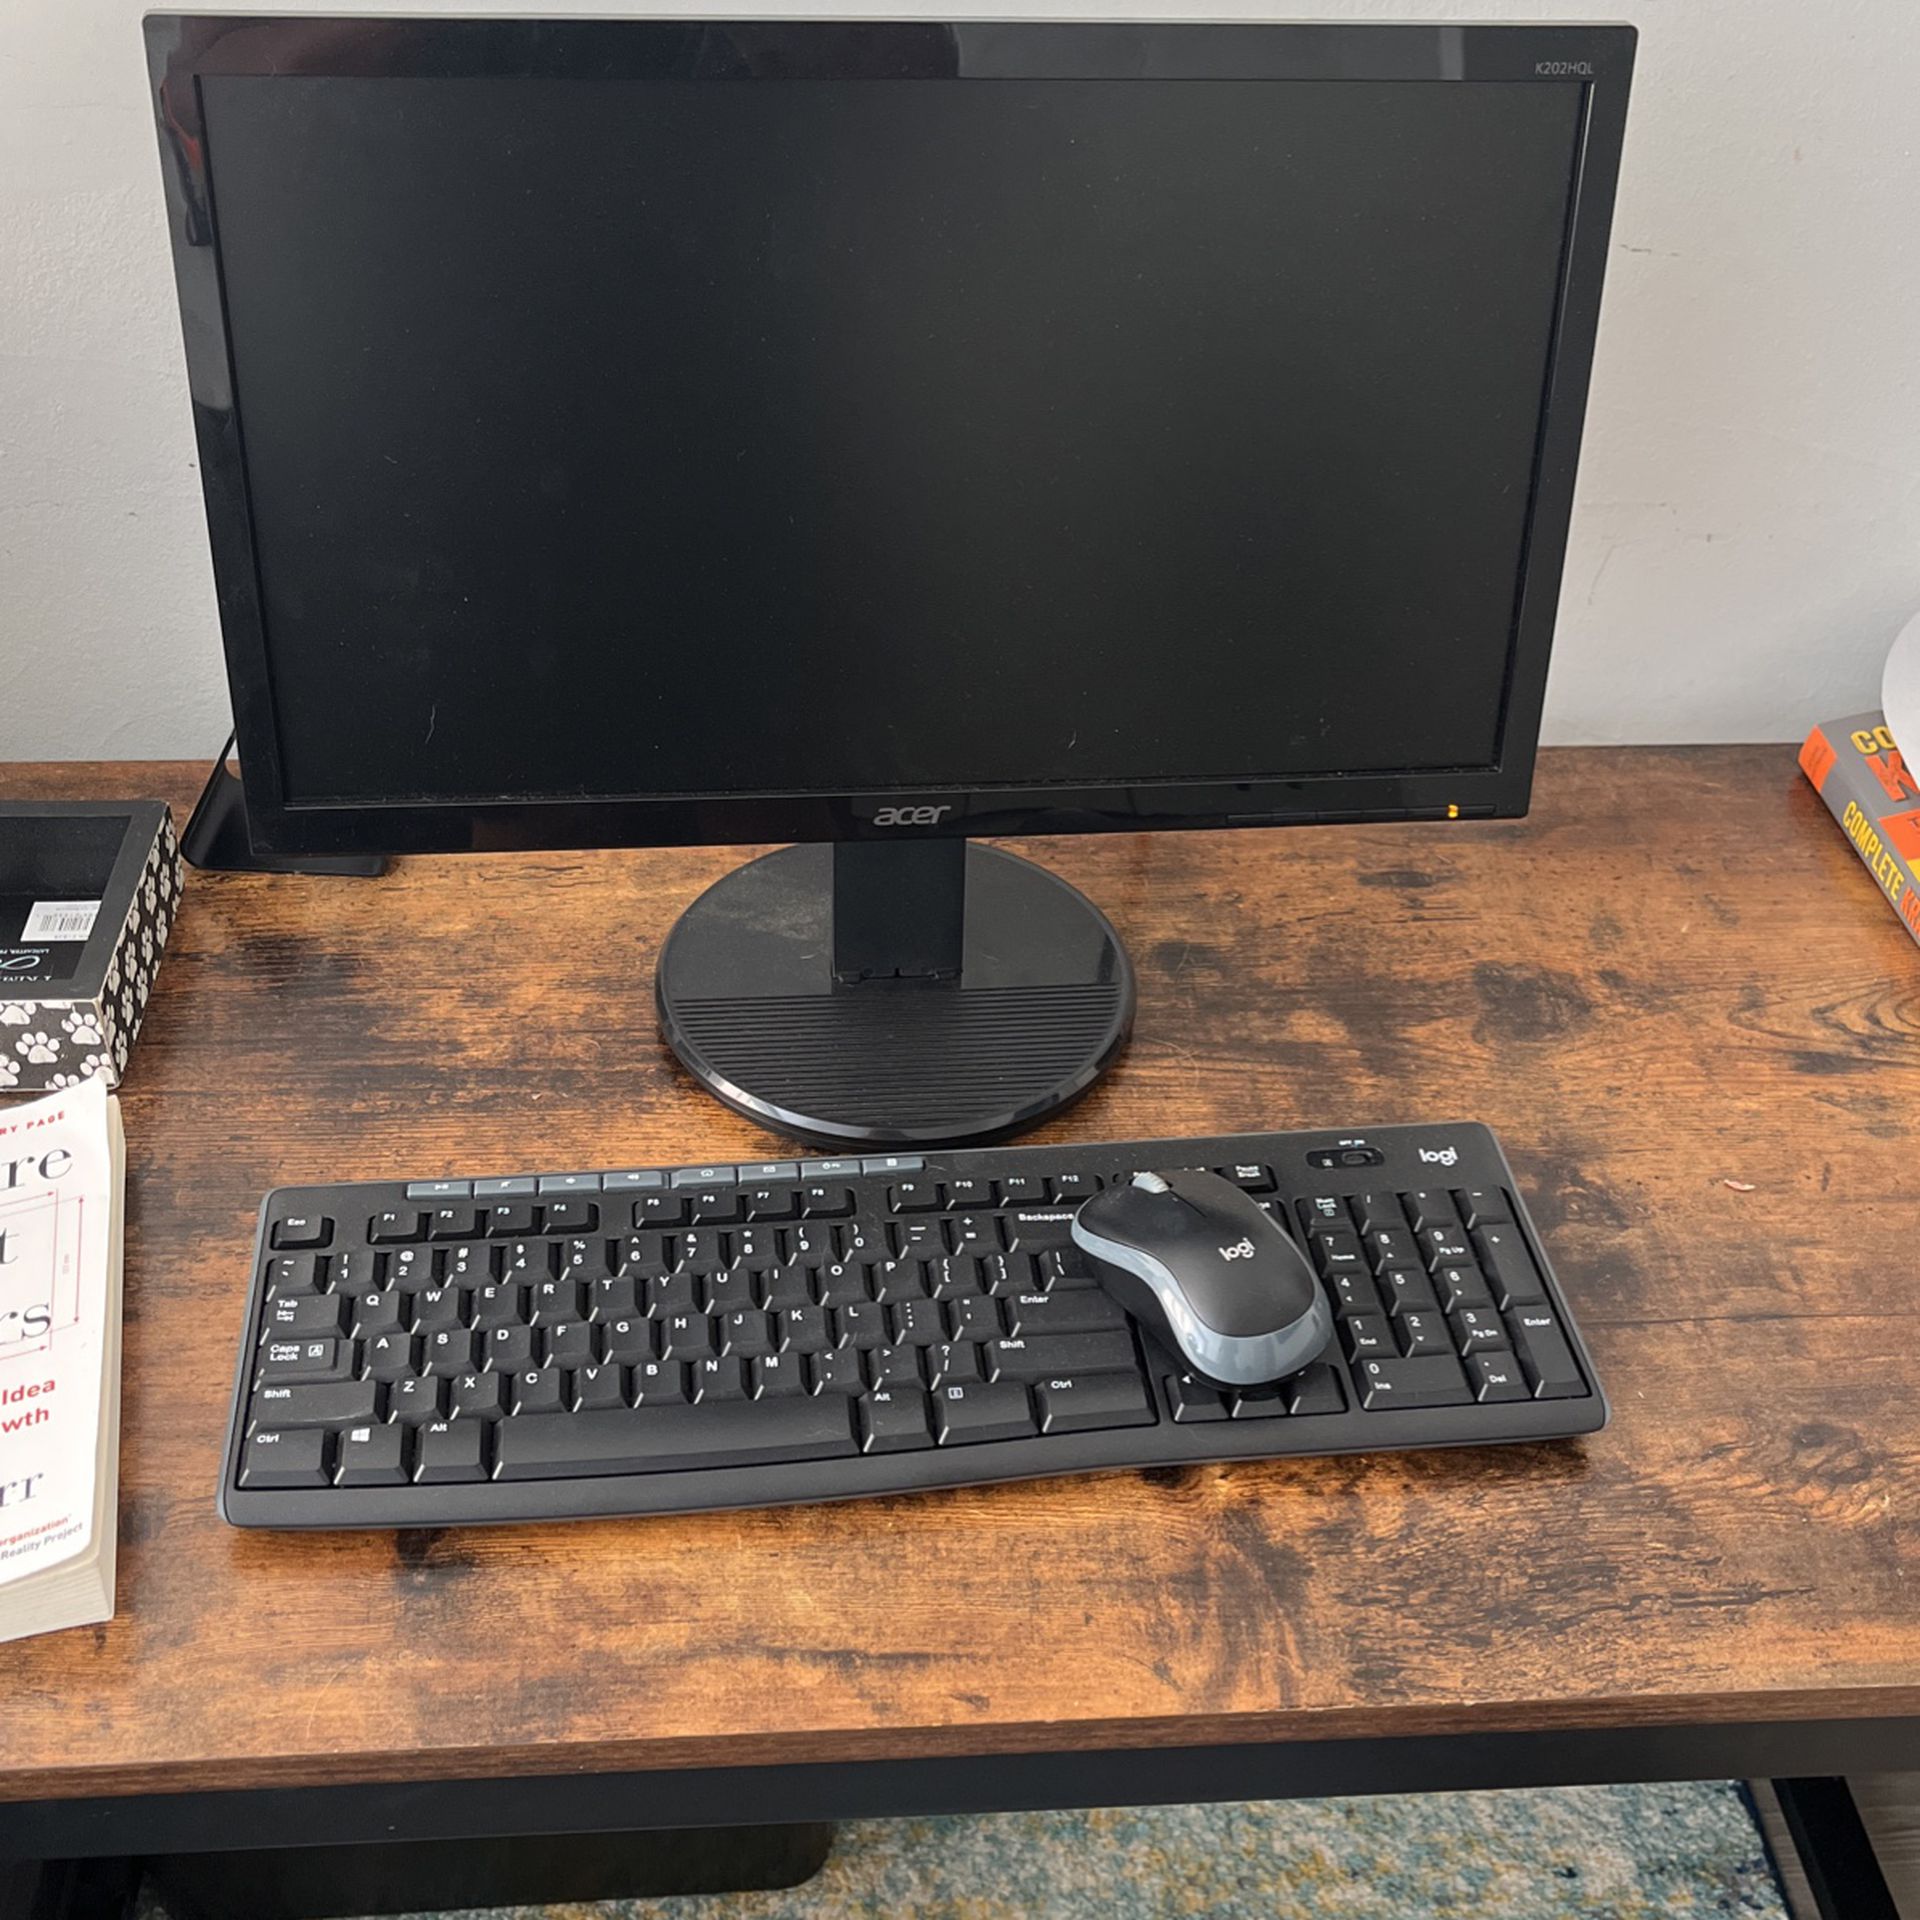 19.5 Acer Monitor and Logi Mouse keyboard 